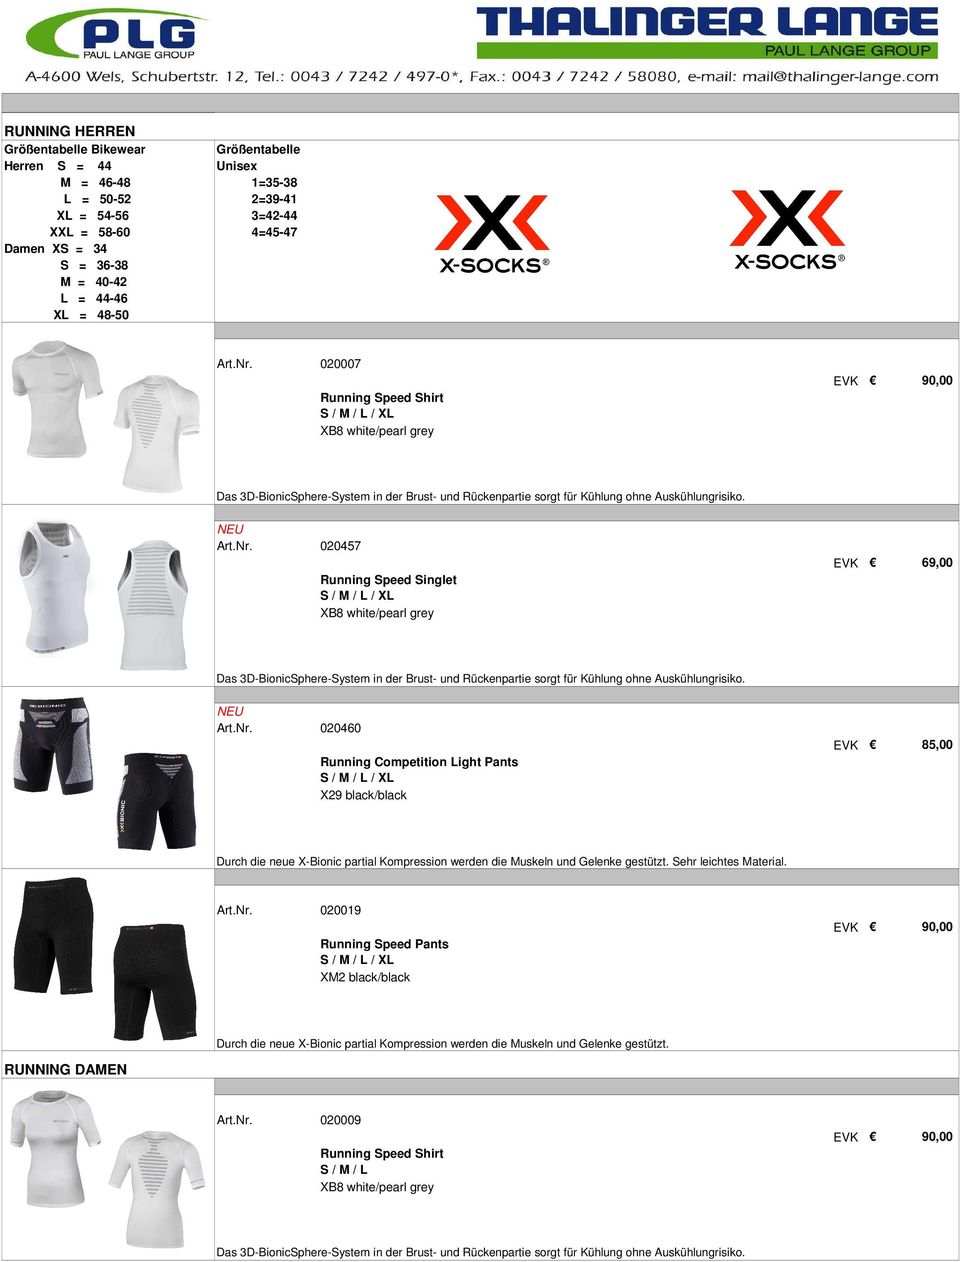 020457 Running Speed Singlet XB8 white/pearl grey 69,00 020460 Running Competition Light Pants X29 black/black 85,00 Sehr leichtes